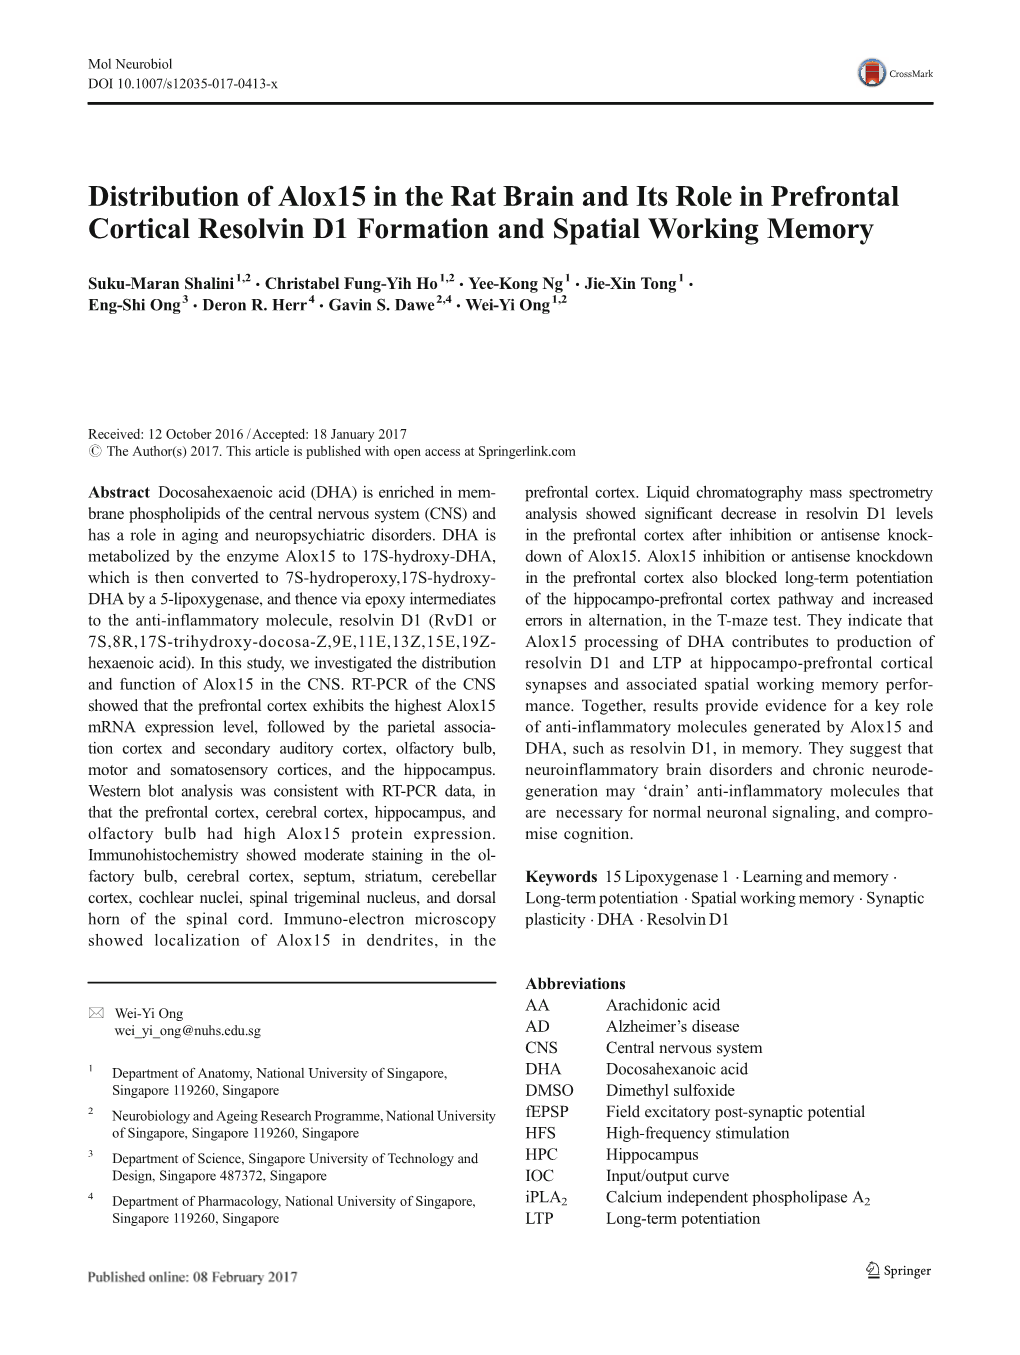 Distribution of Alox15 in the Rat Brain and Its Role in Prefrontal Cortical Resolvin D1 Formation and Spatial Working Memory